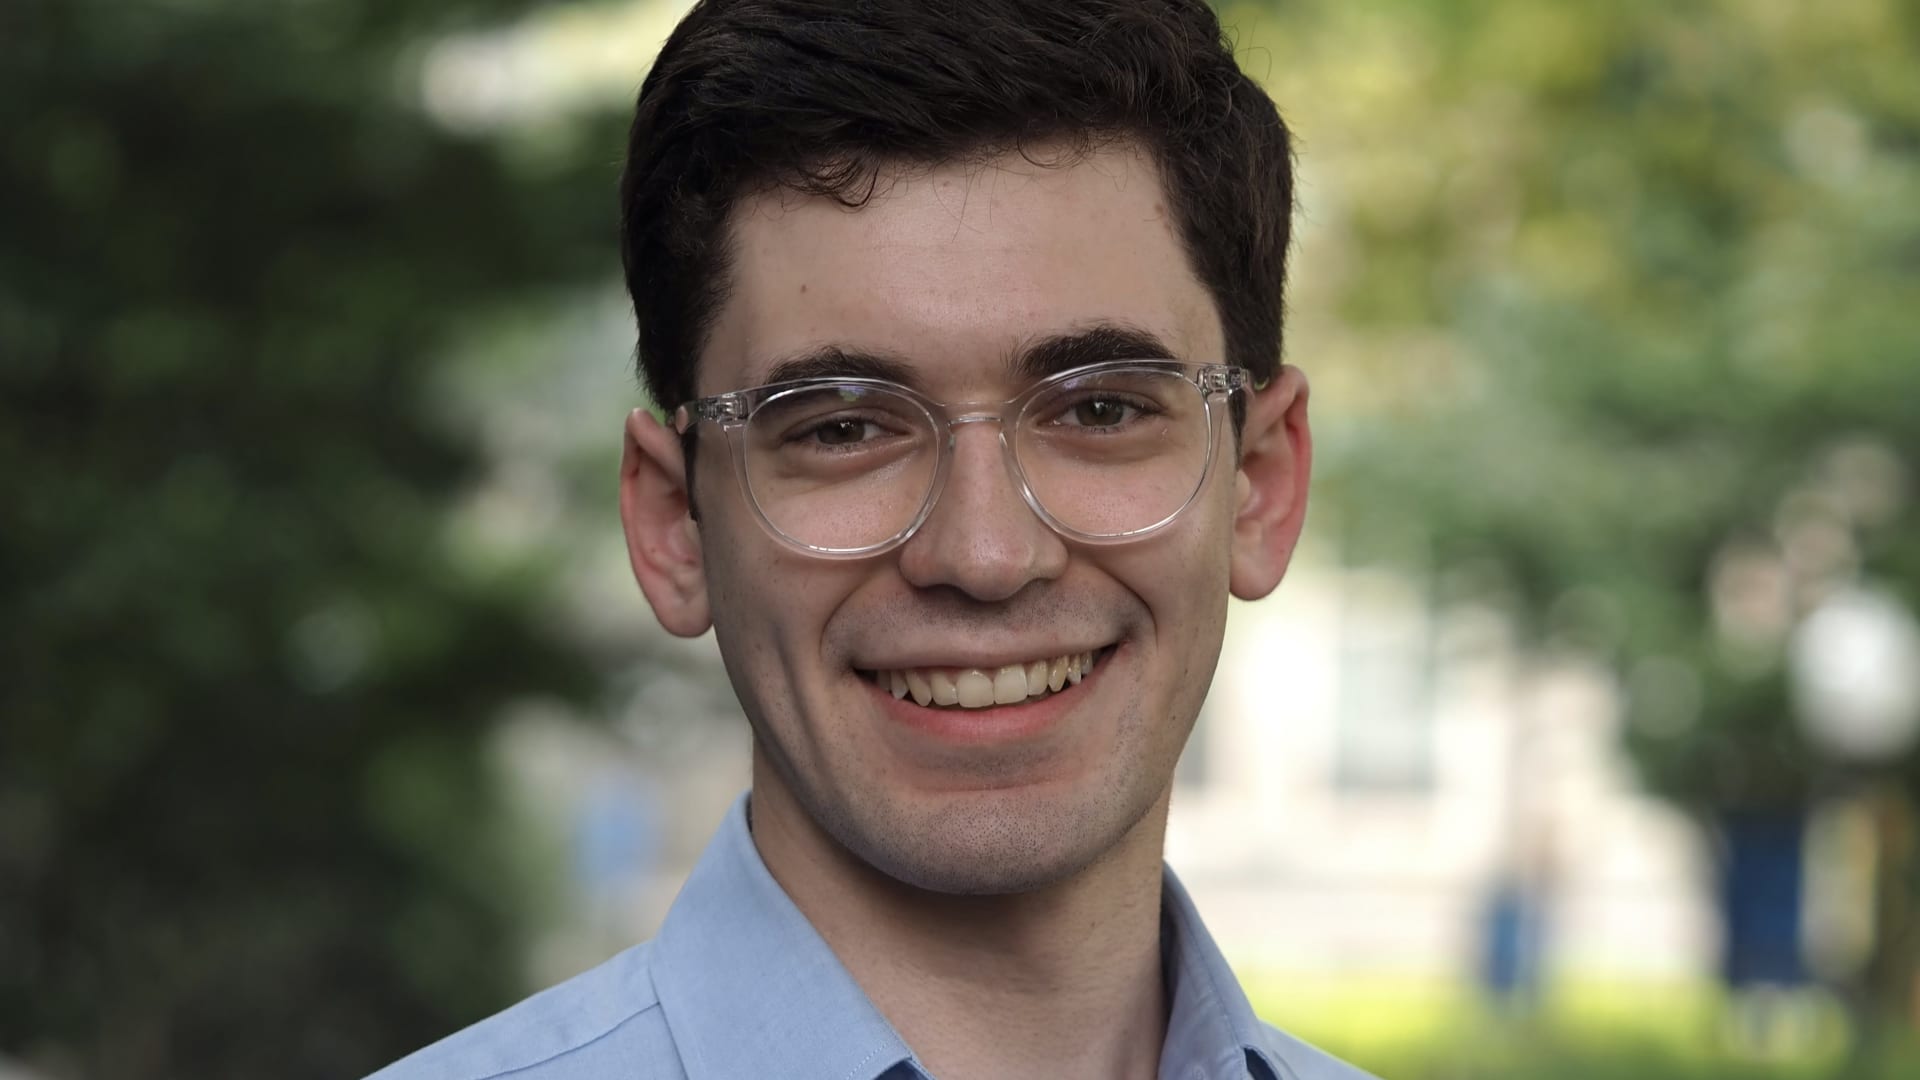 Ben Telerski, 22, is a senior studying government at Georgetown University.